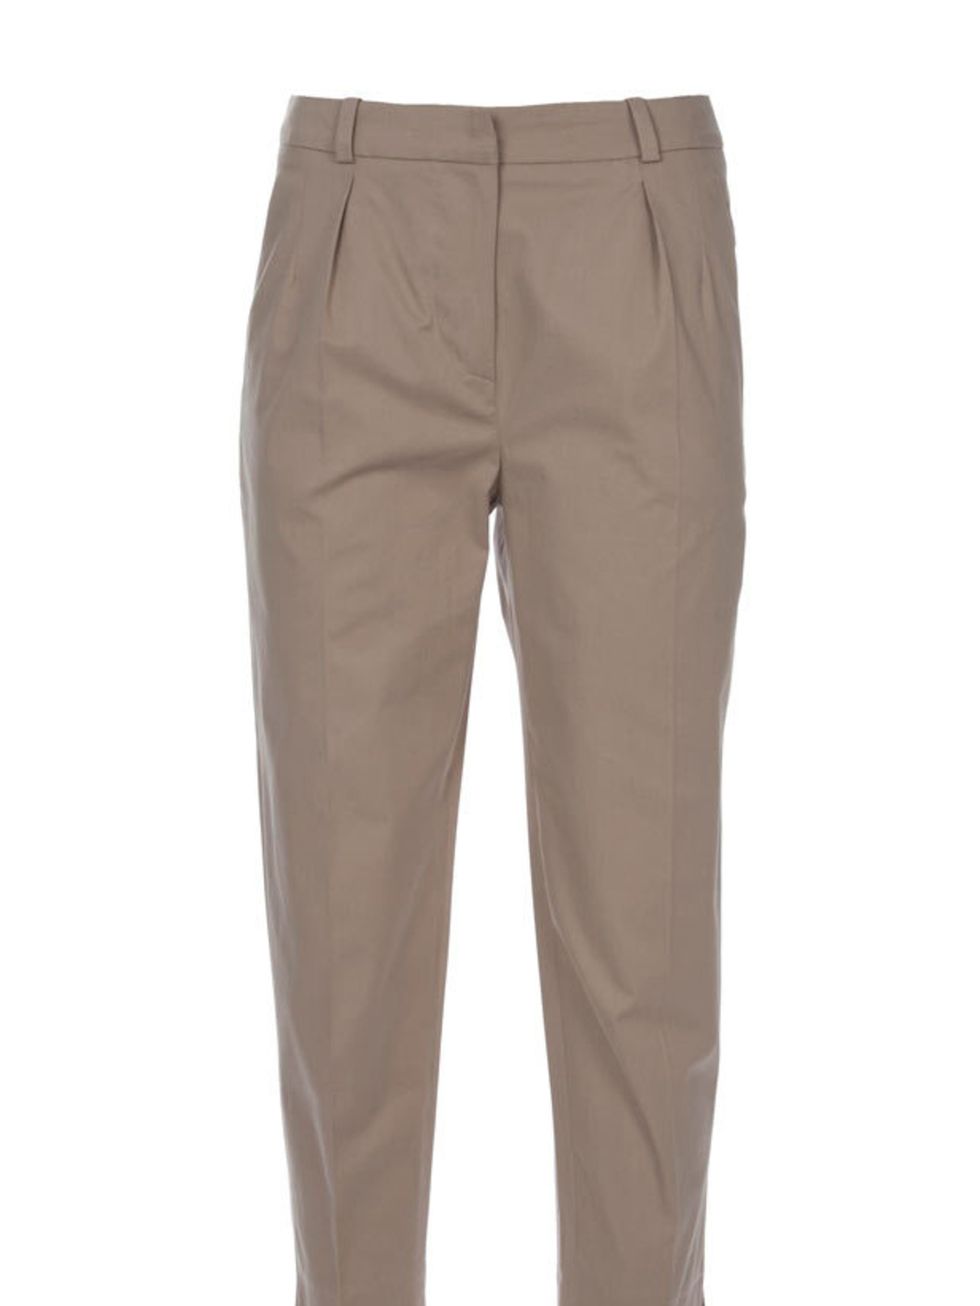 <p>Carven high waisted trousers, £165, at <a href="http://www.start-london.com/designers/womens/carven-1/beige-cropped-trousers-4154.html">Start London</a></p>